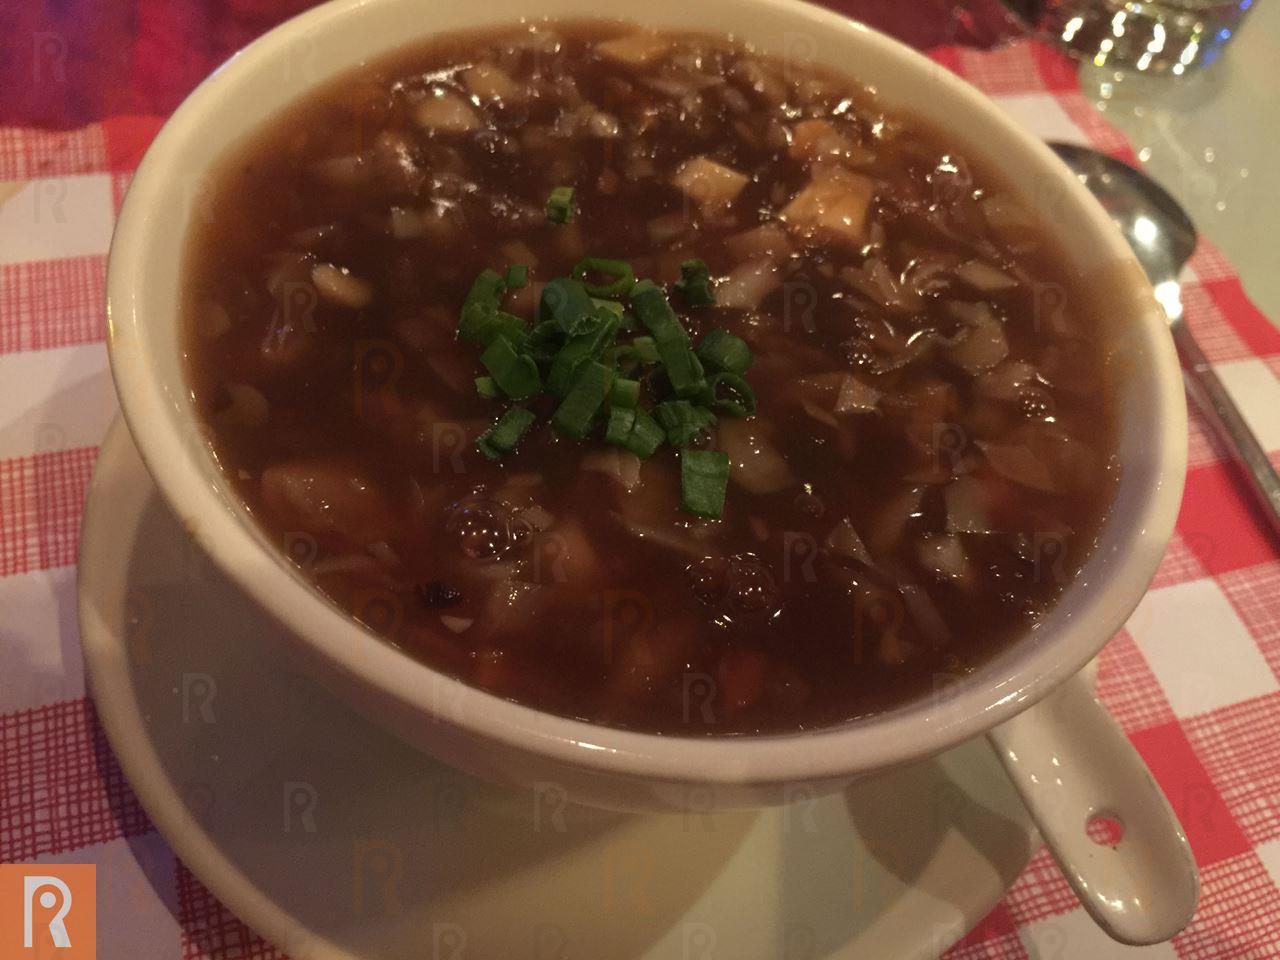 Hot and Sour soup